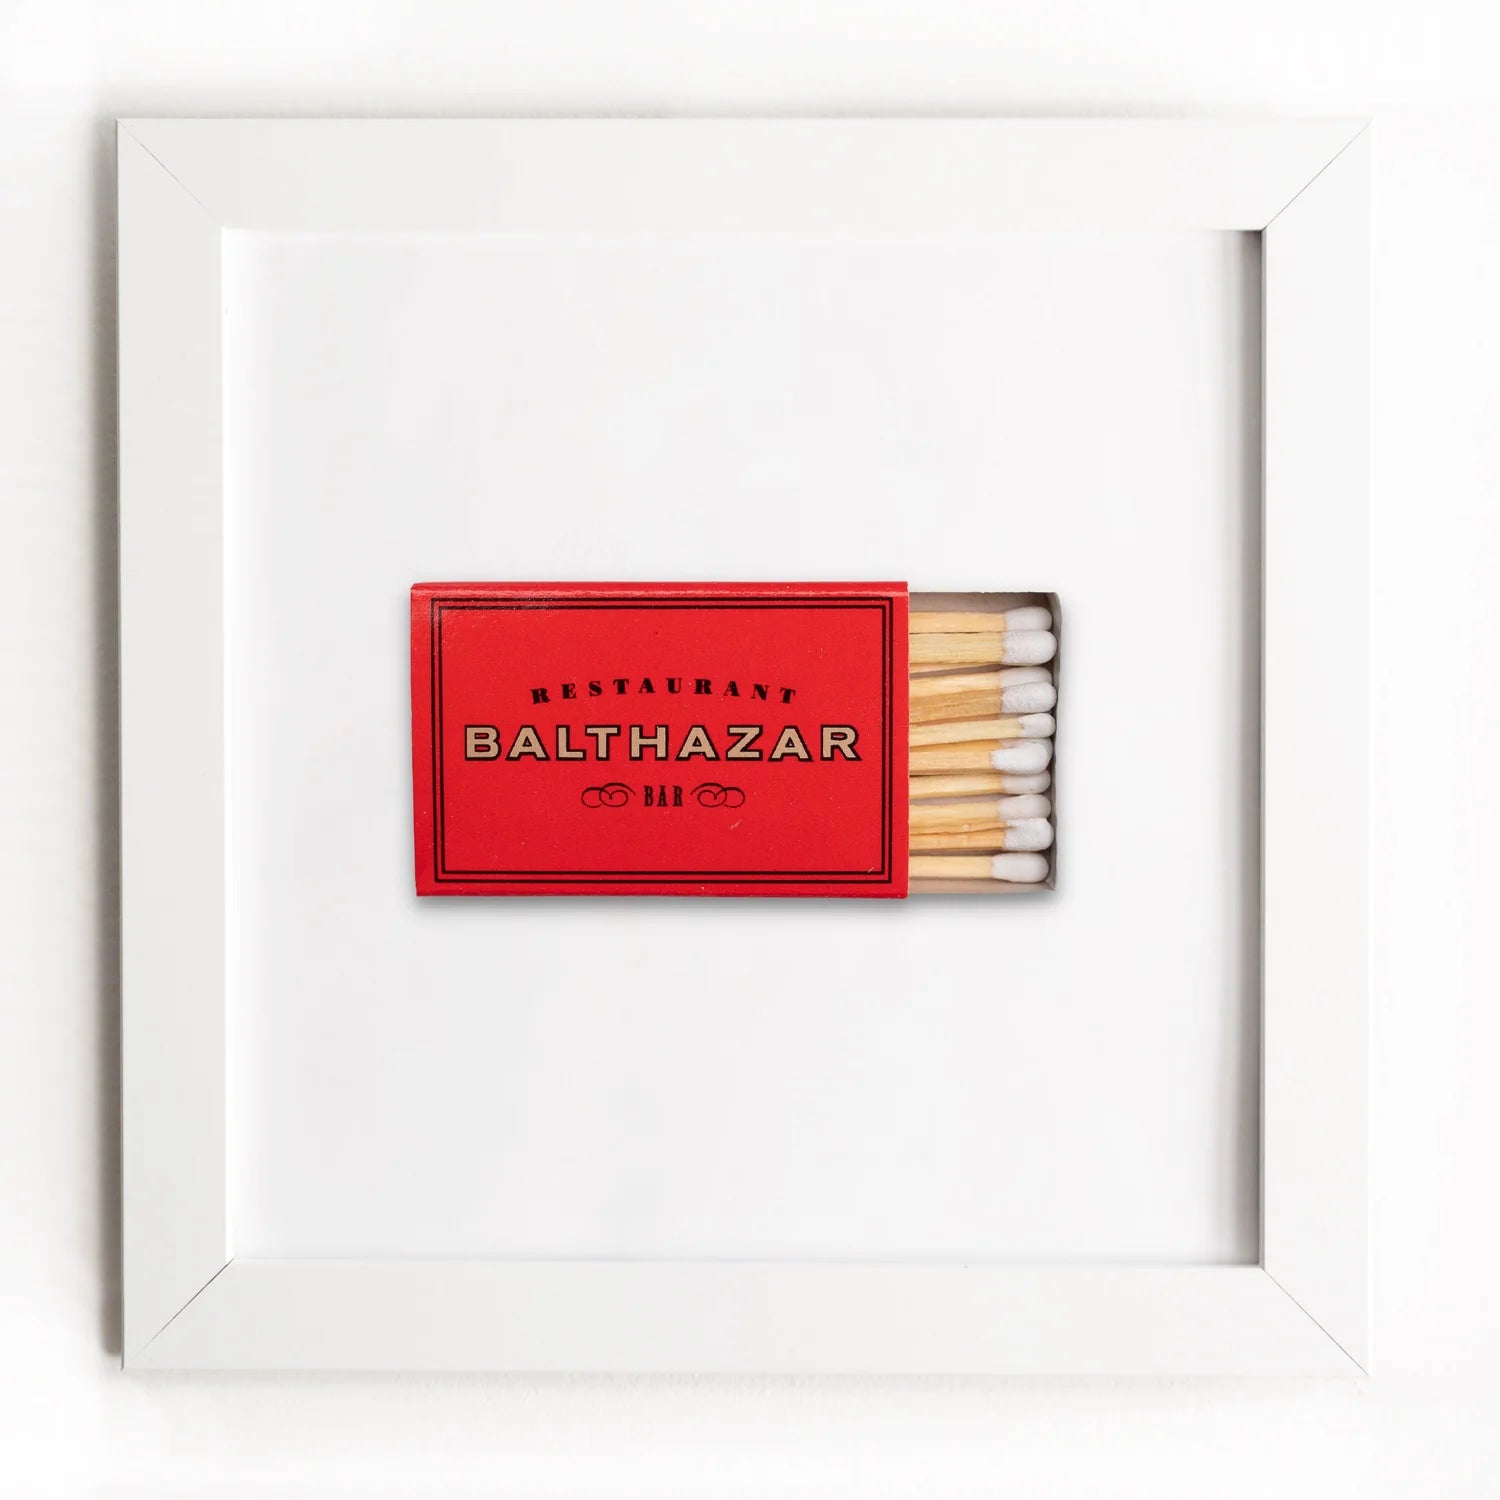 A framed display featuring a red matchbook from Restaurant Balthazar with Arizona style, alongside a row of matches, all against an Art Square White Frame background by Match South.